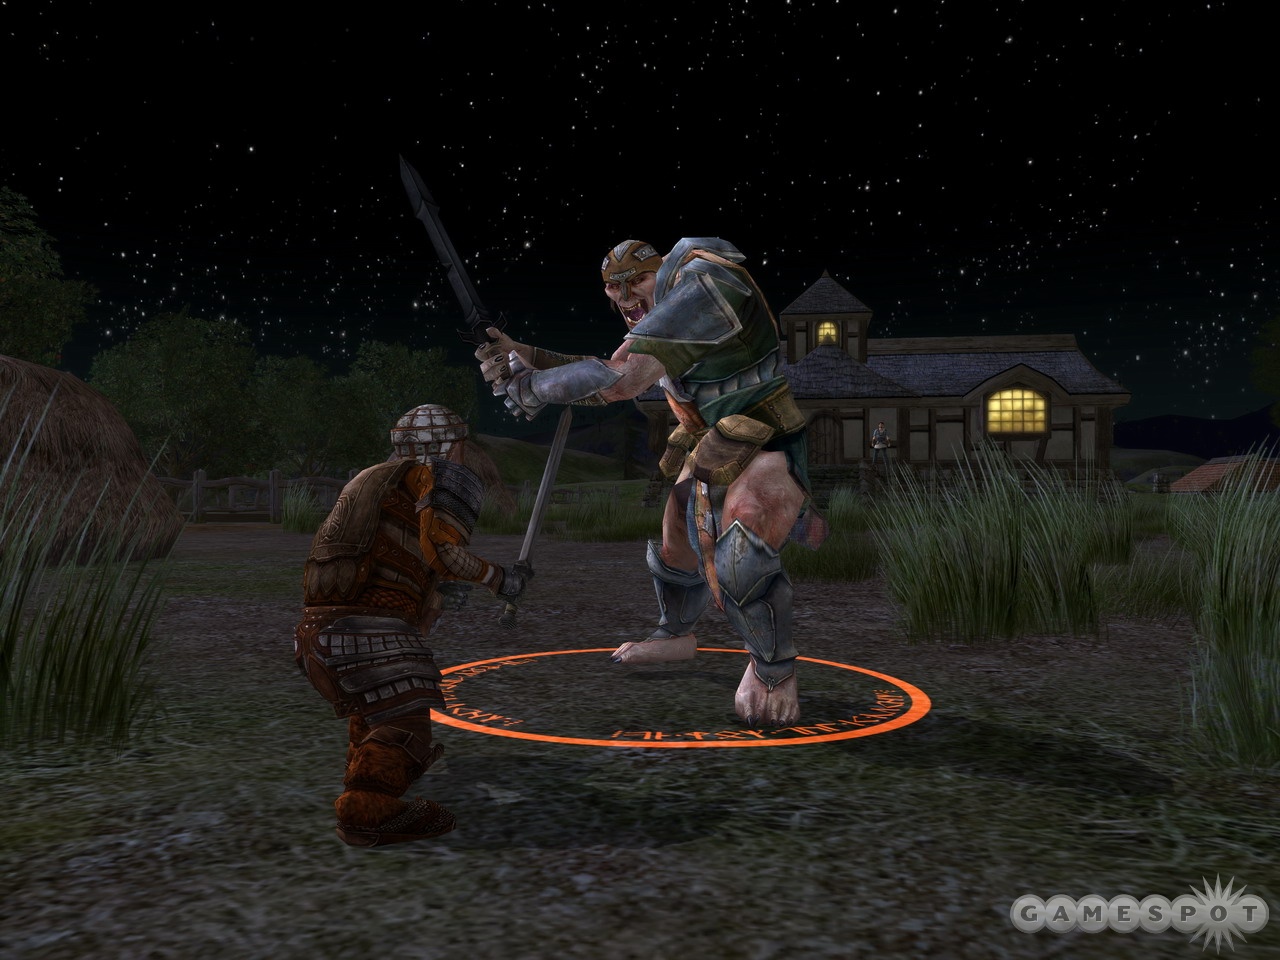 You can either adventure in the Entmoors as a high-level hero, or take control of a high-level monster.